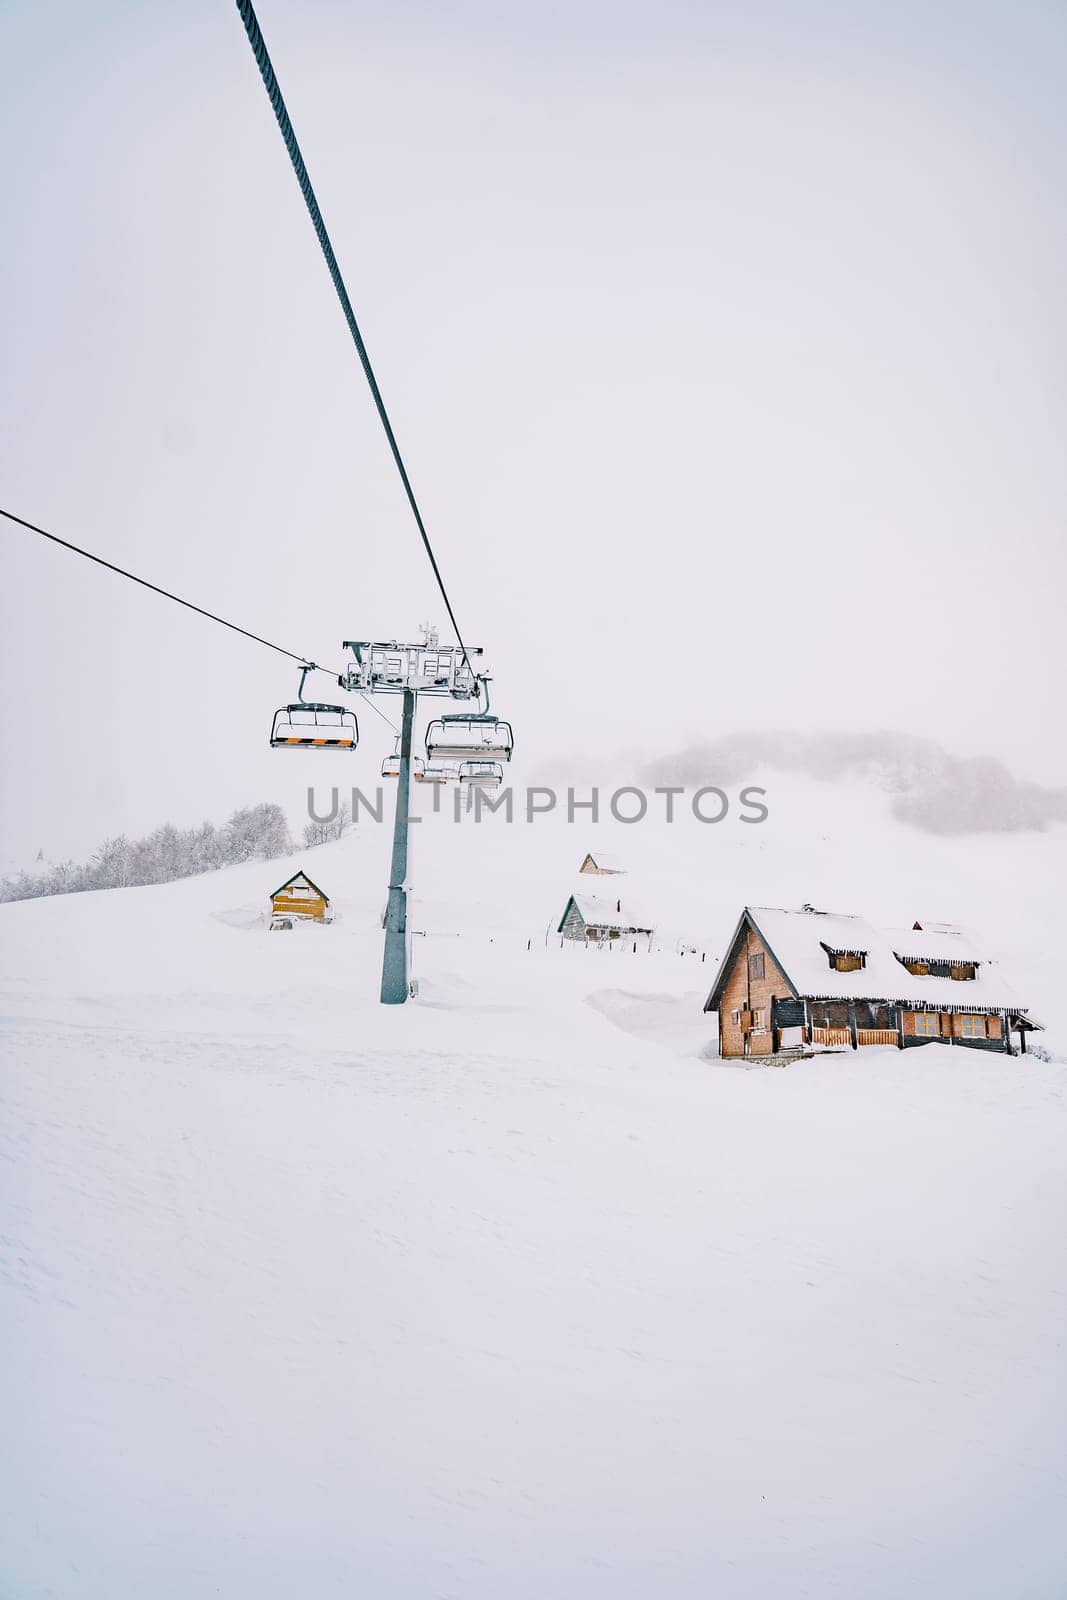 Chairlift passes by wooden cottages on a snow-capped mountain. High quality photo